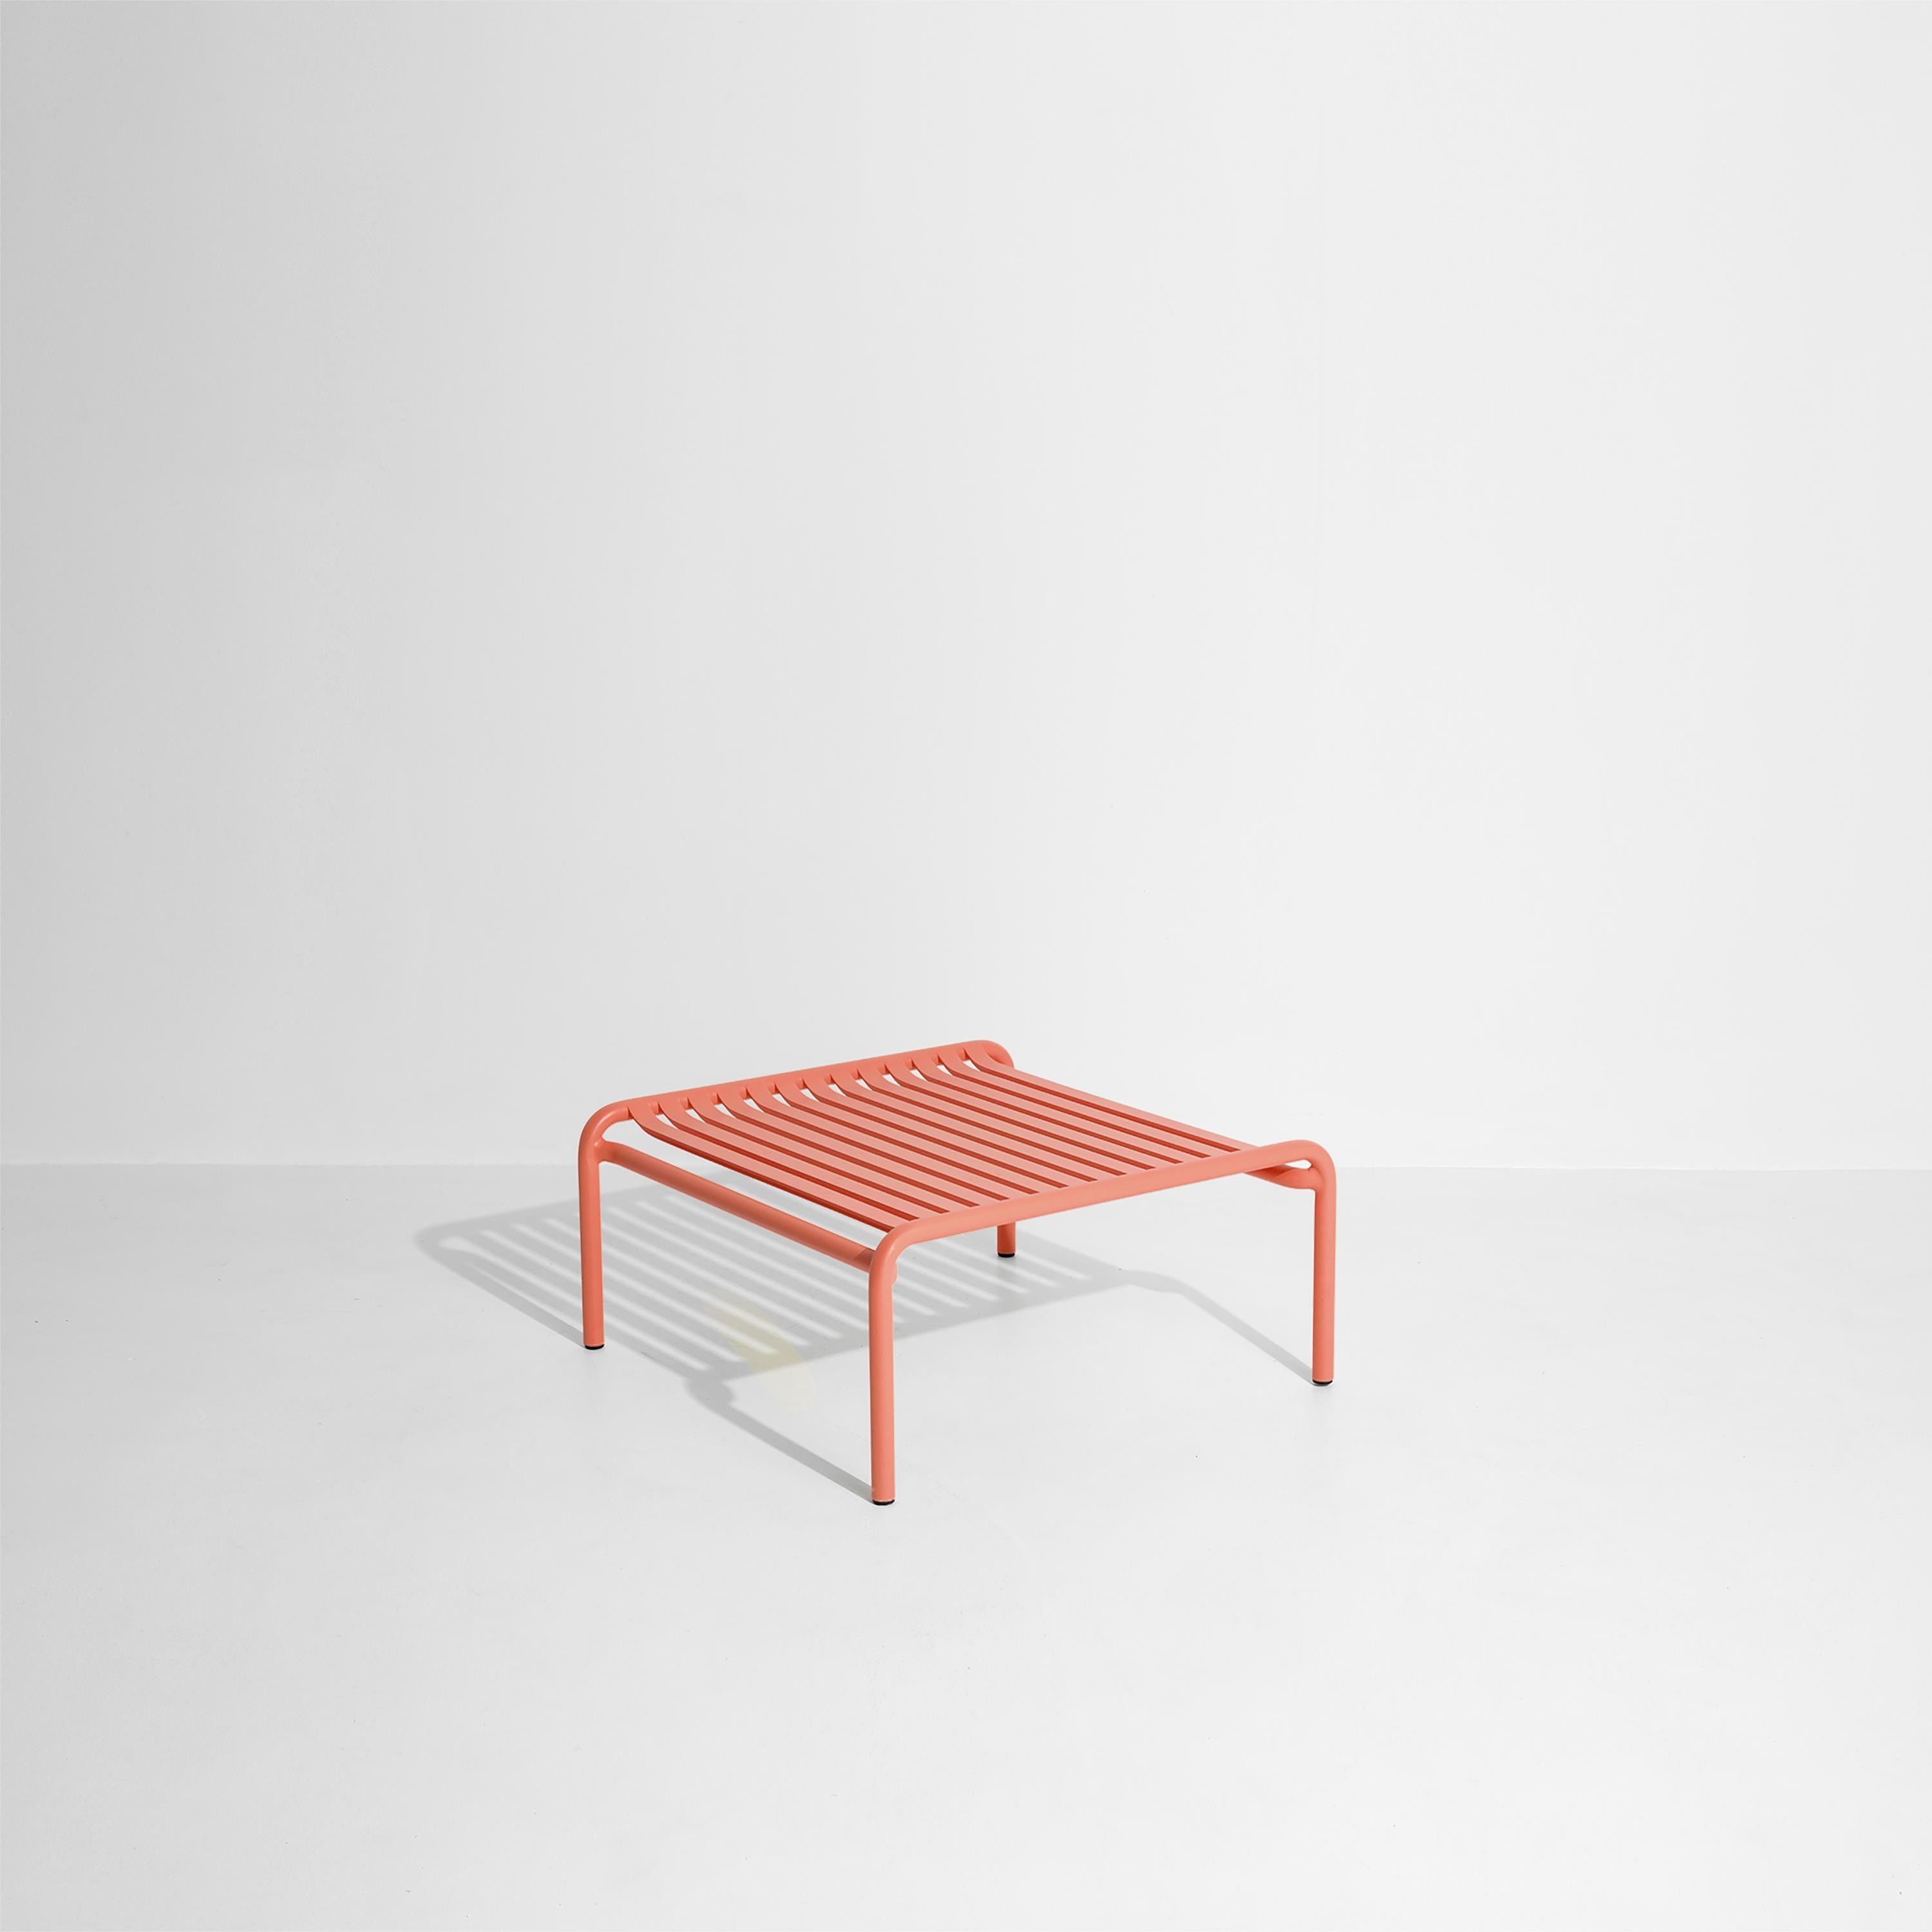 Petite Friture Week-End Coffee Table in Coral Aluminium by Studio BrichetZiegler, 2017

The week-end collection is a full range of outdoor furniture, in aluminium grained epoxy paint, matt finish, that includes 18 functions and 8 colours for the